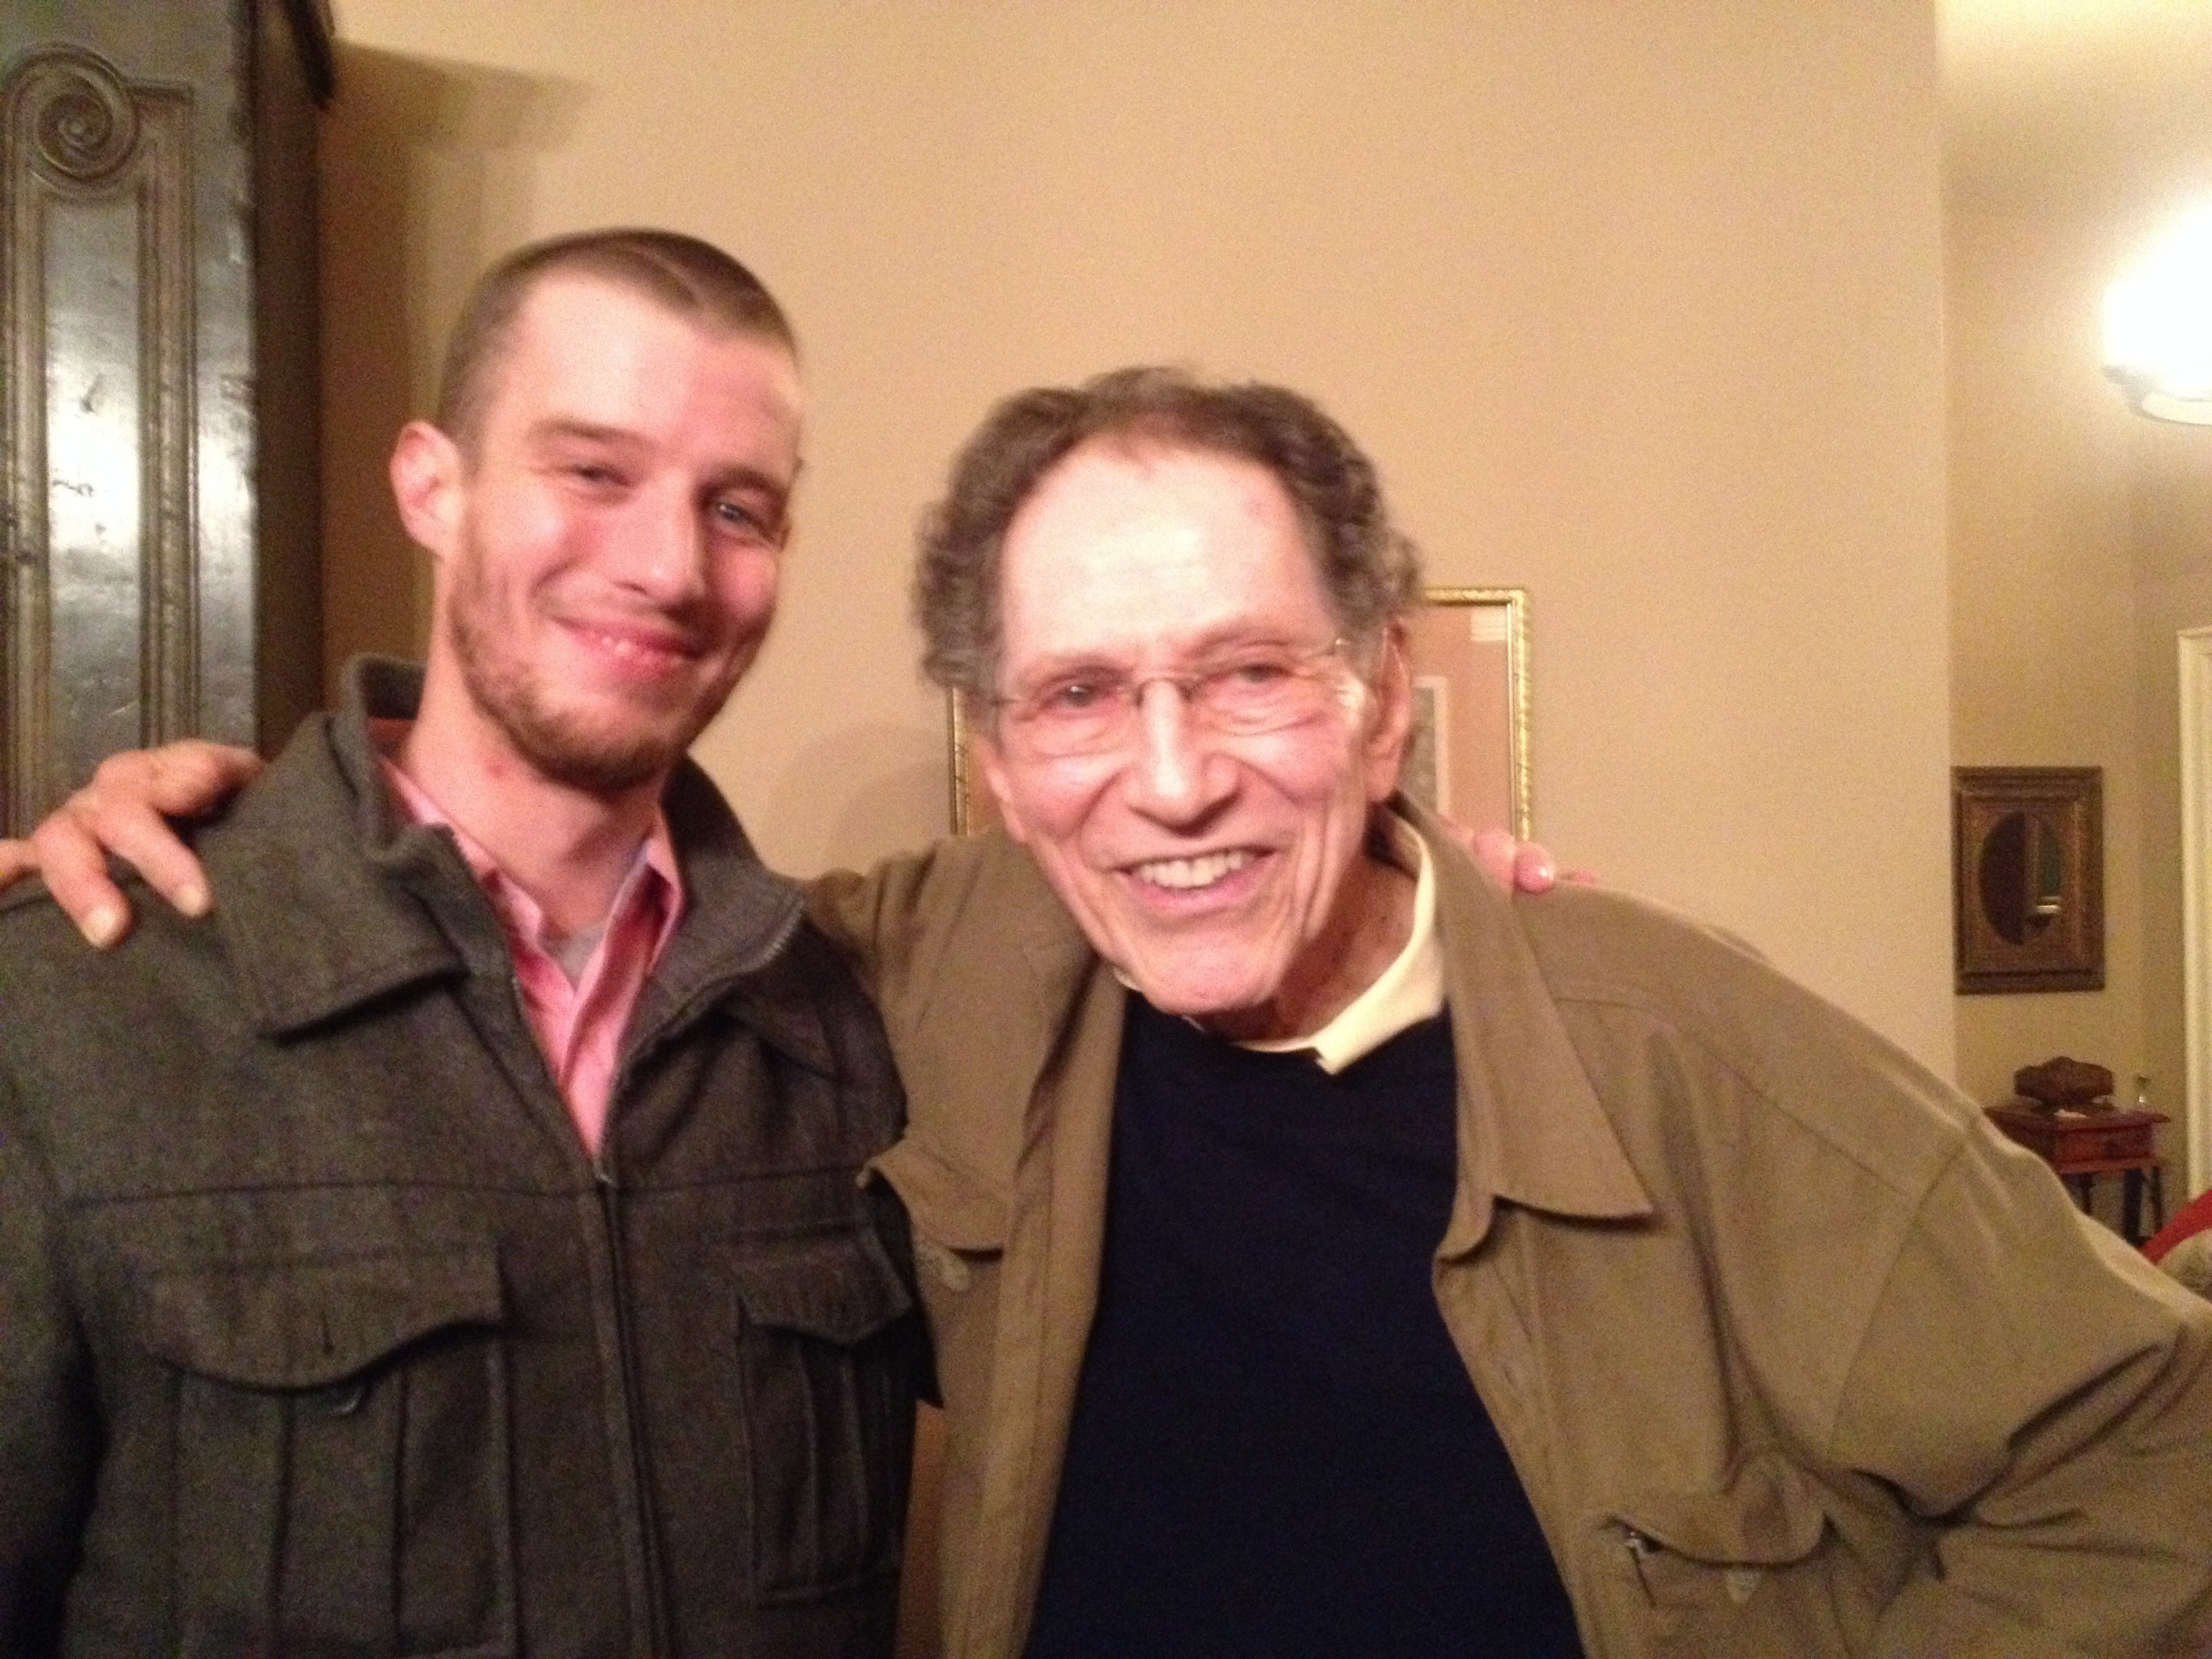 At 84 years old, Harvard Professor Tom Lehrer was asked by 2 Chainz 

for permission to sample a song Lehrer wrote at 24. He responded: "I 

grant you motherfuckers permission to do this. Please give my 

regards to Mr. Chainz, or may I call him 2?"